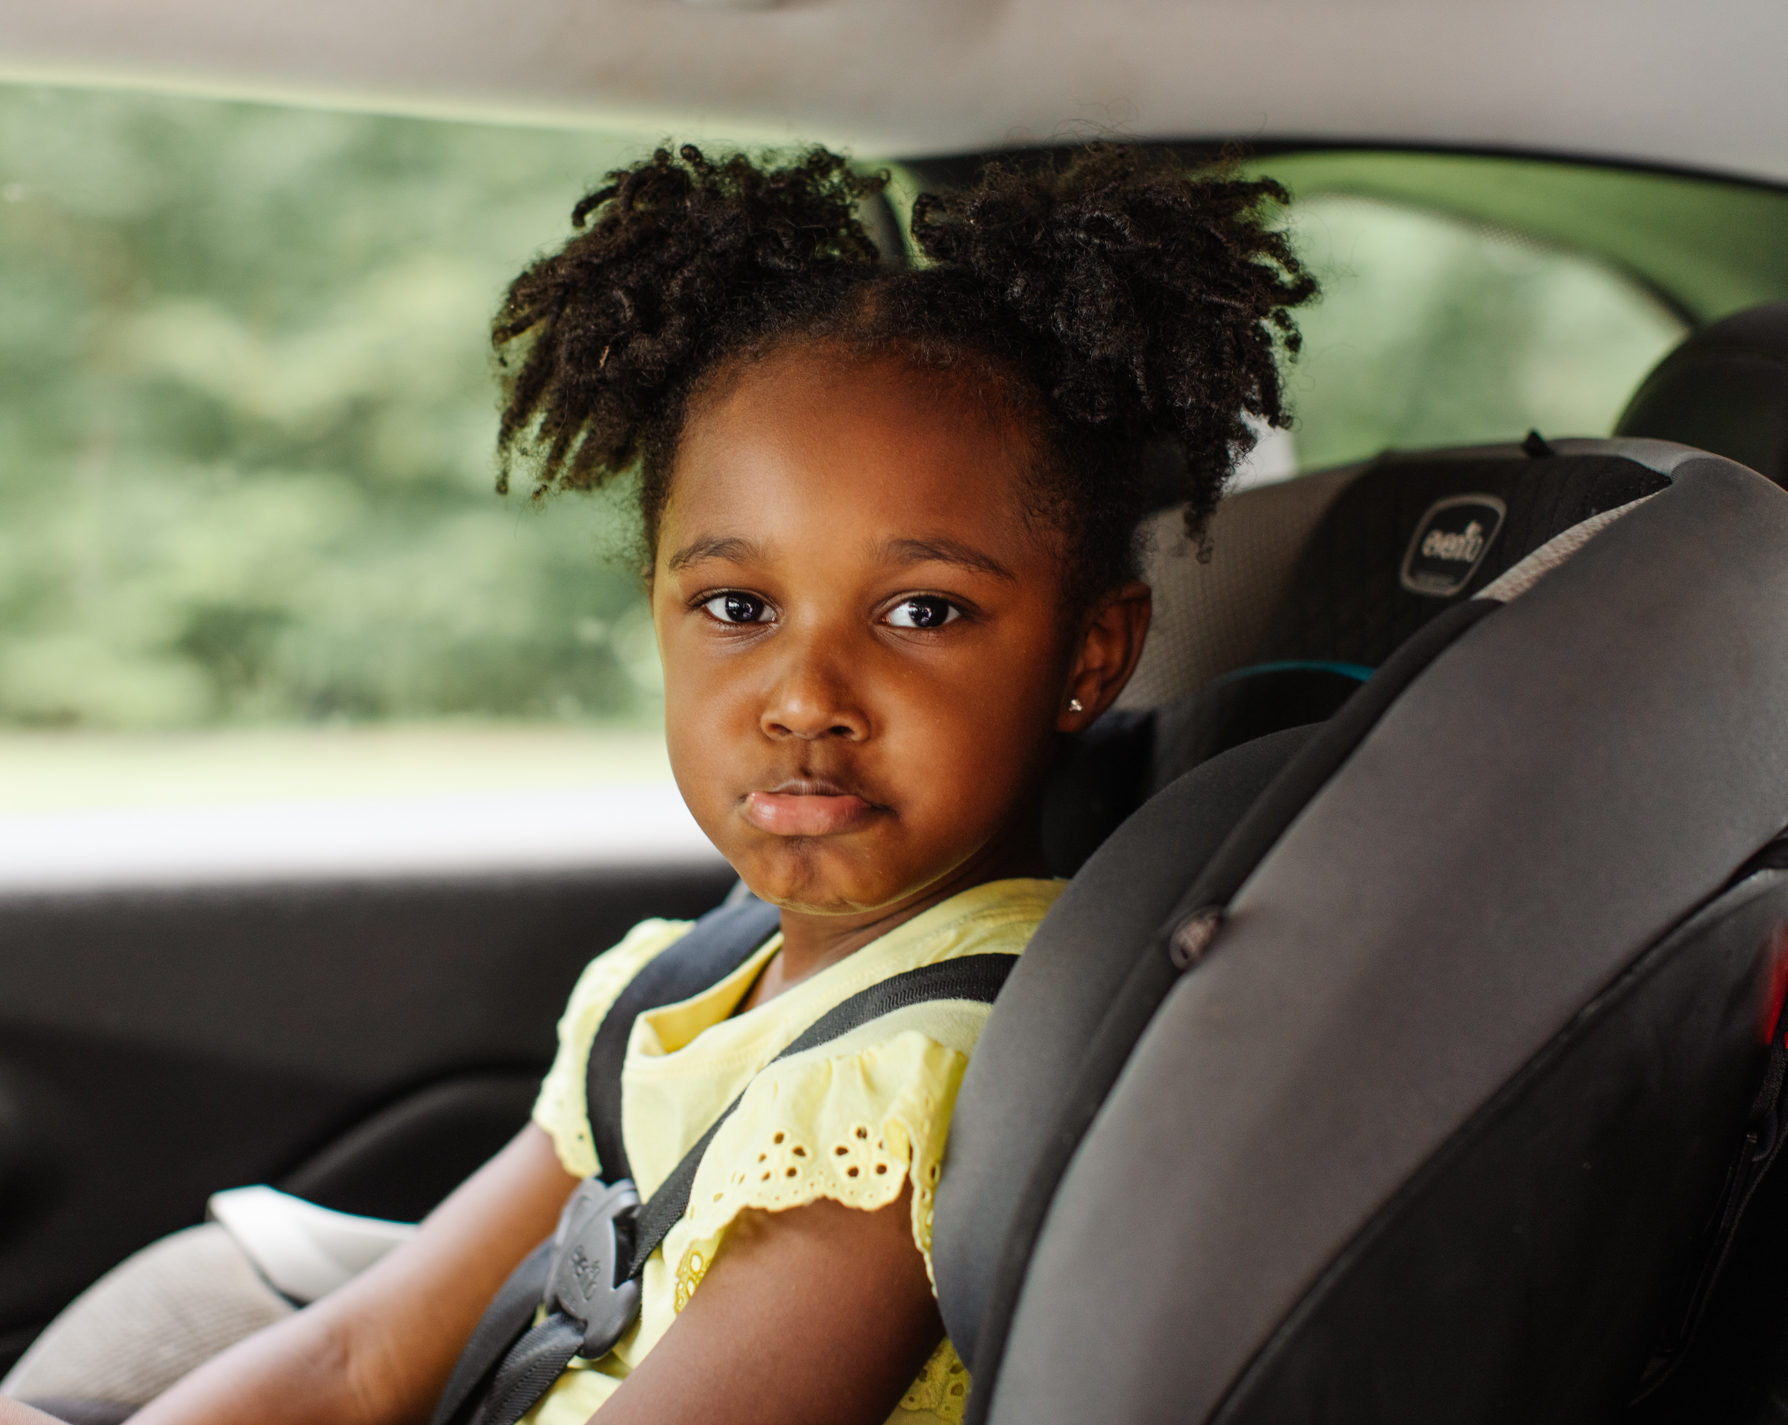 Travel Safety With Kids: Essential Travel Safety Tips For Families